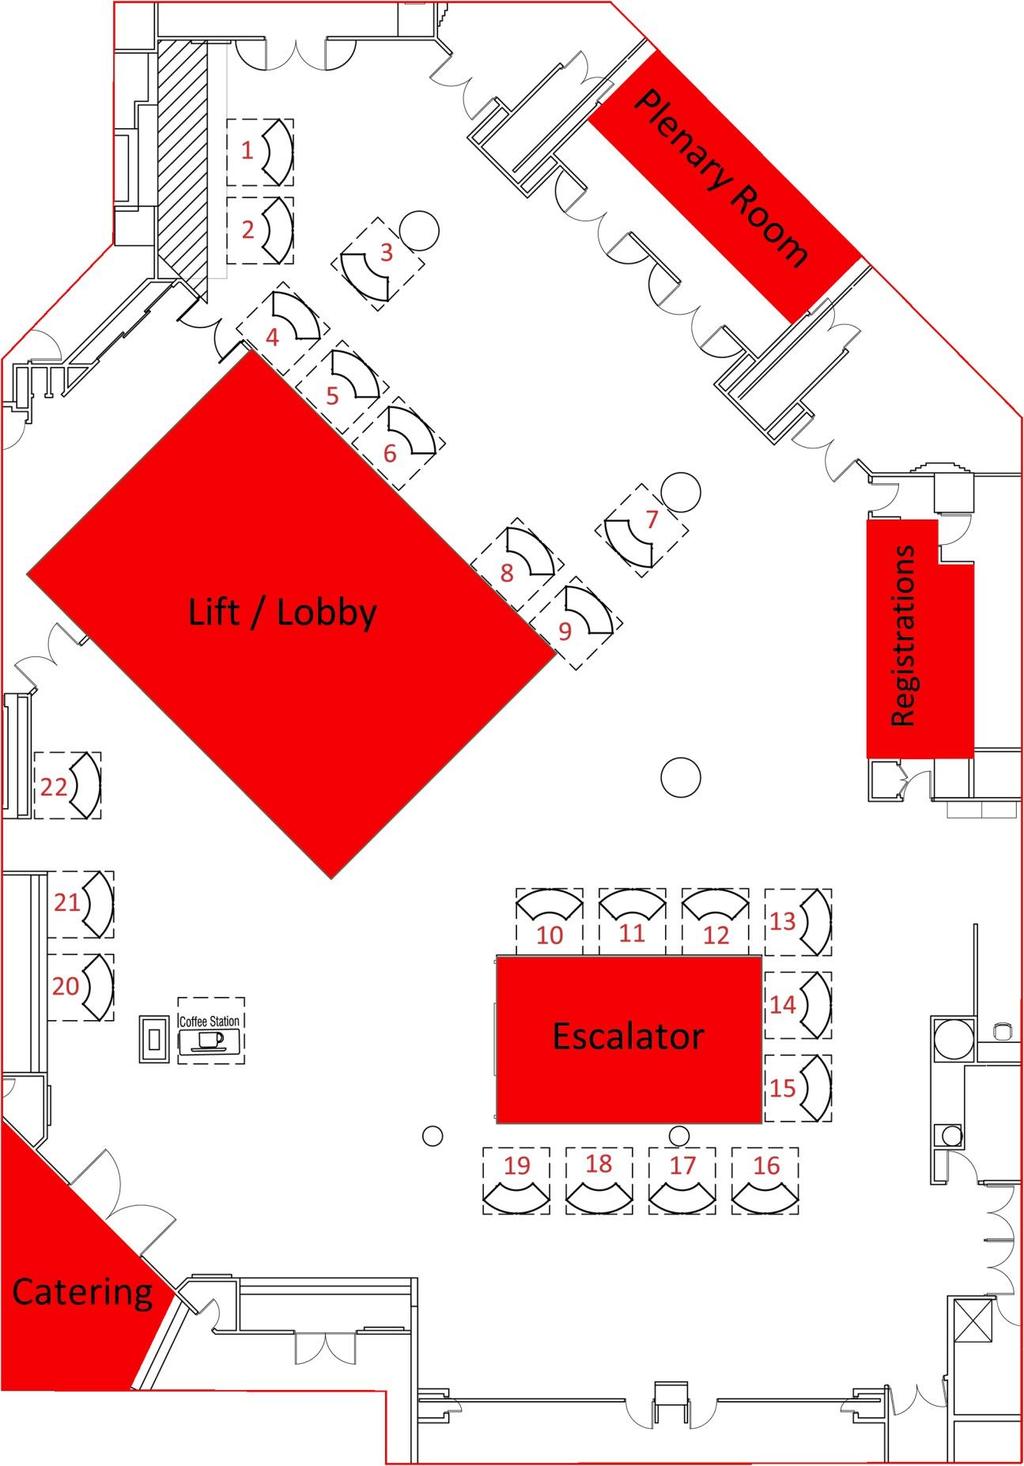 Venue Floor Plan NB: Stand seven Allocated to Disability Employment